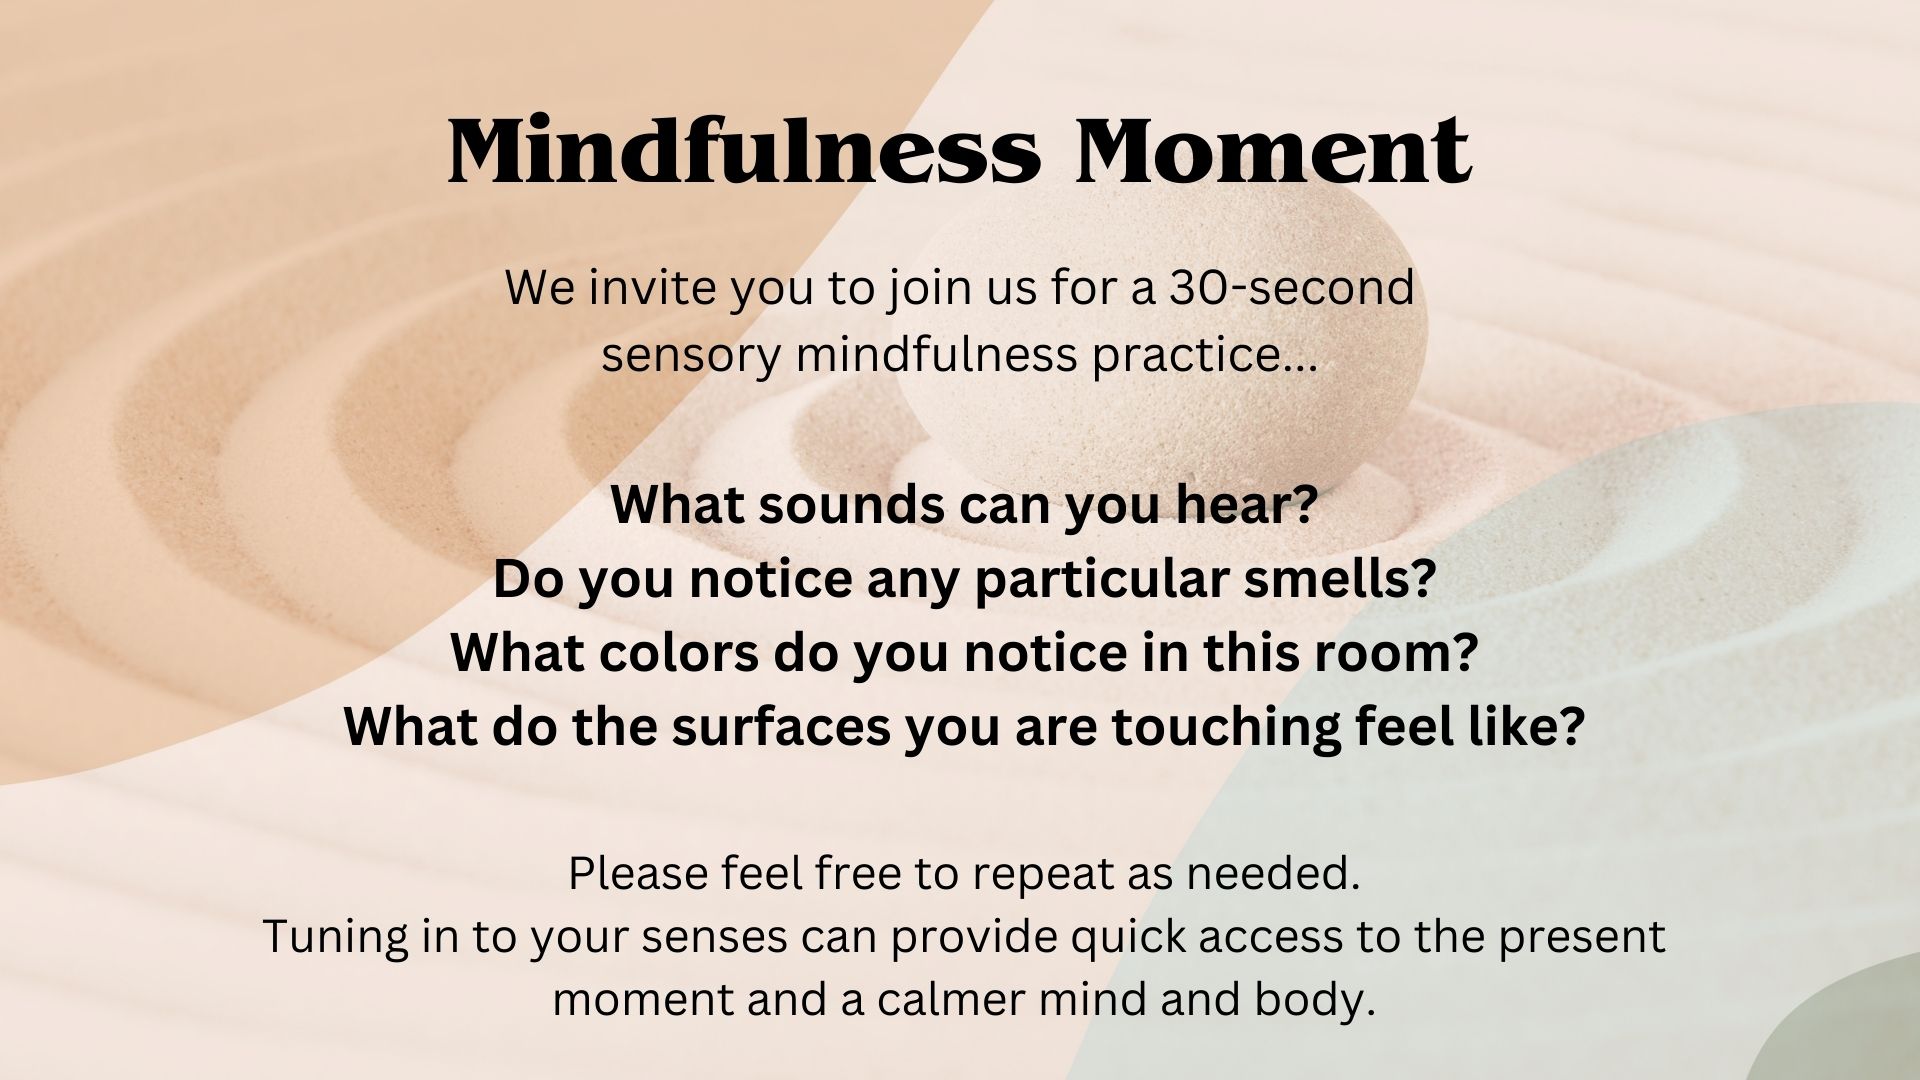 30-second mindfulness practice using the senses